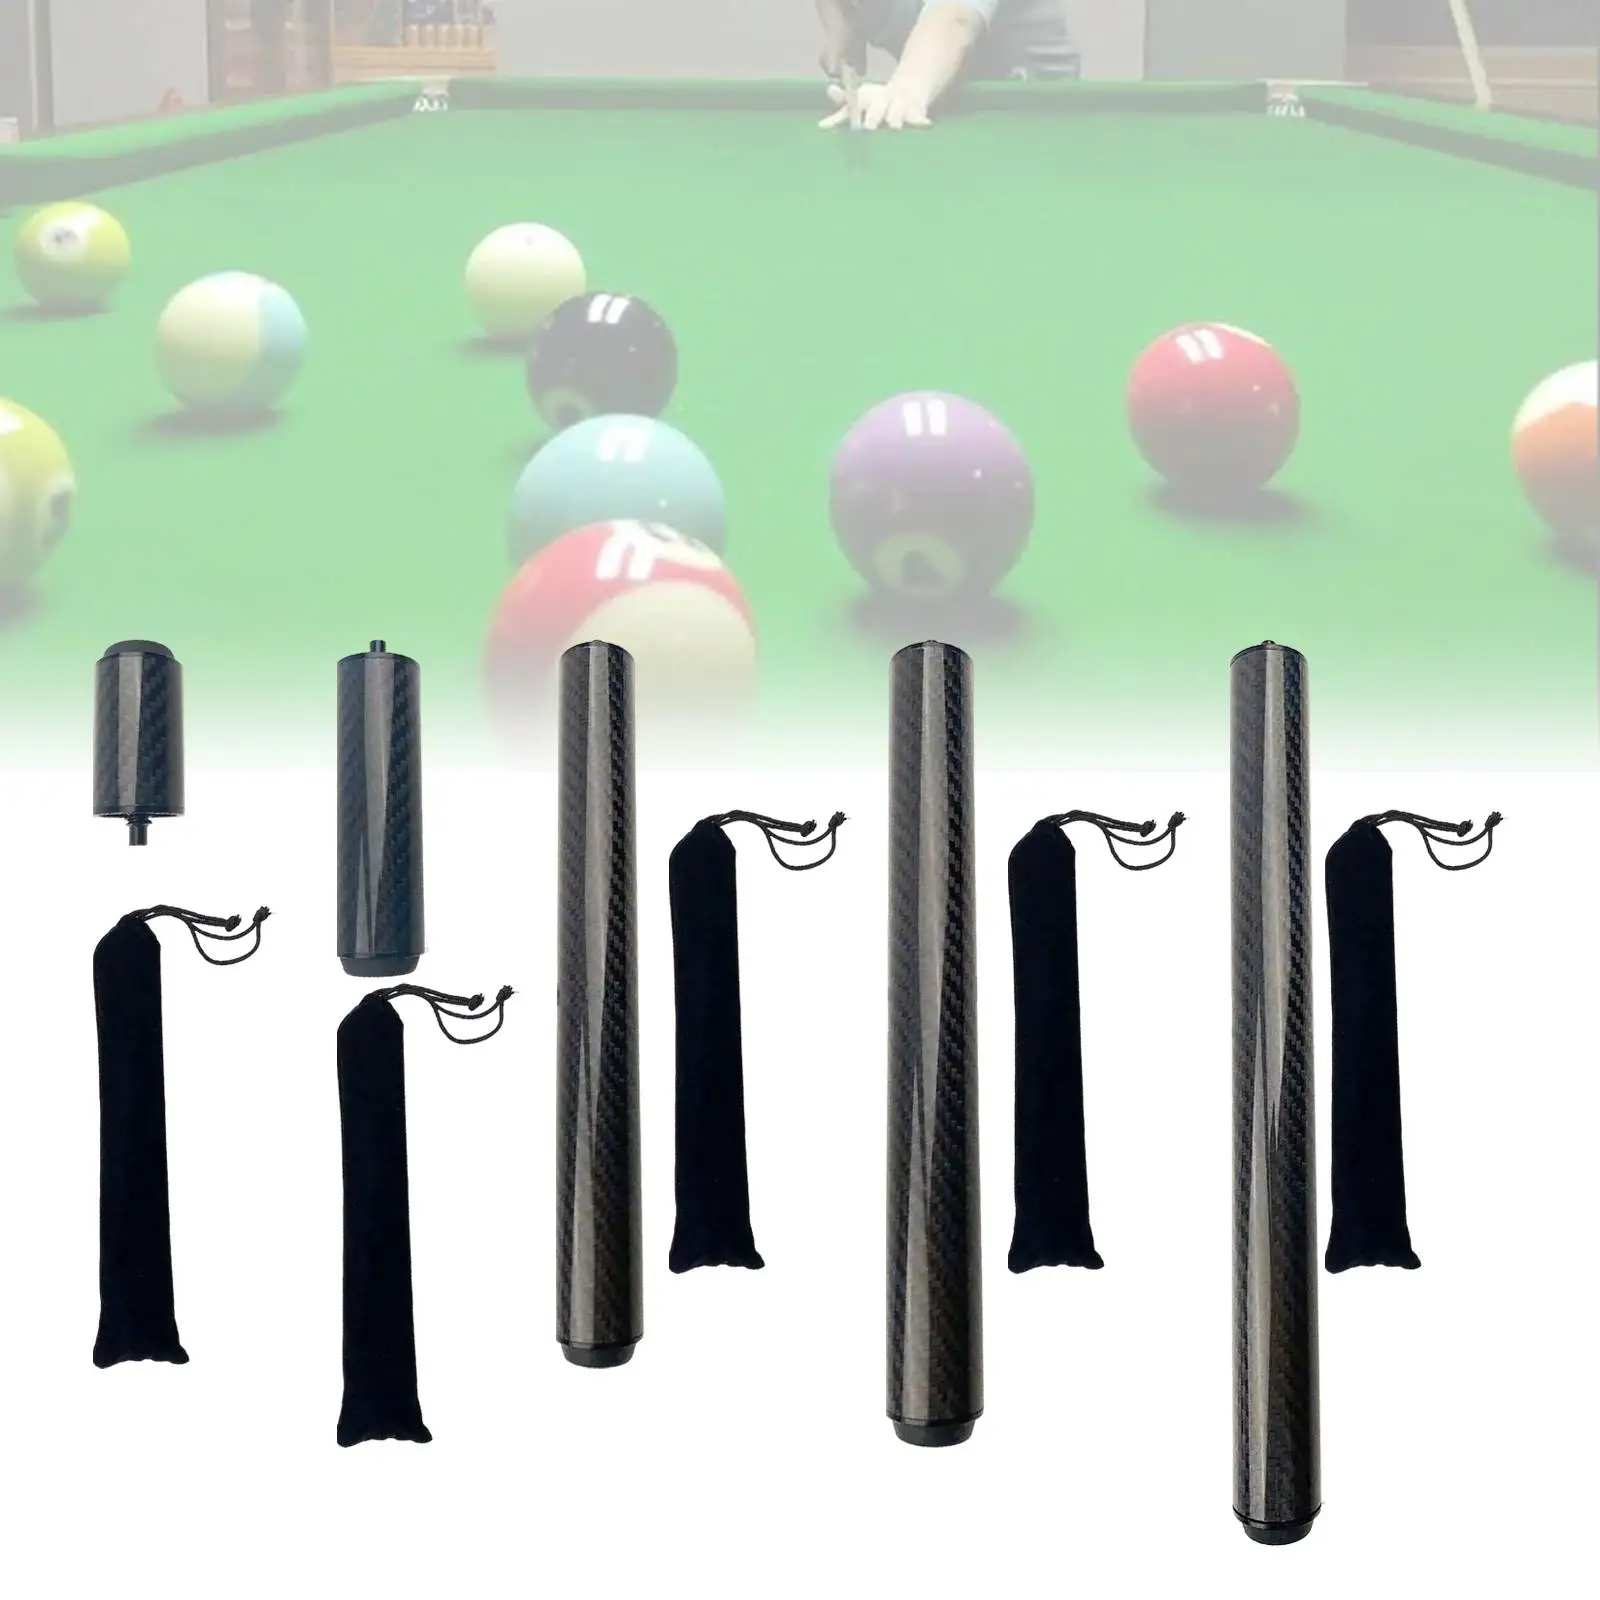 Billiards Pool Cue Extension Cue Joint Accessories Portable Cue Butt End Lengthener Carbon Fiber Cue Stick Extenders for Lovers